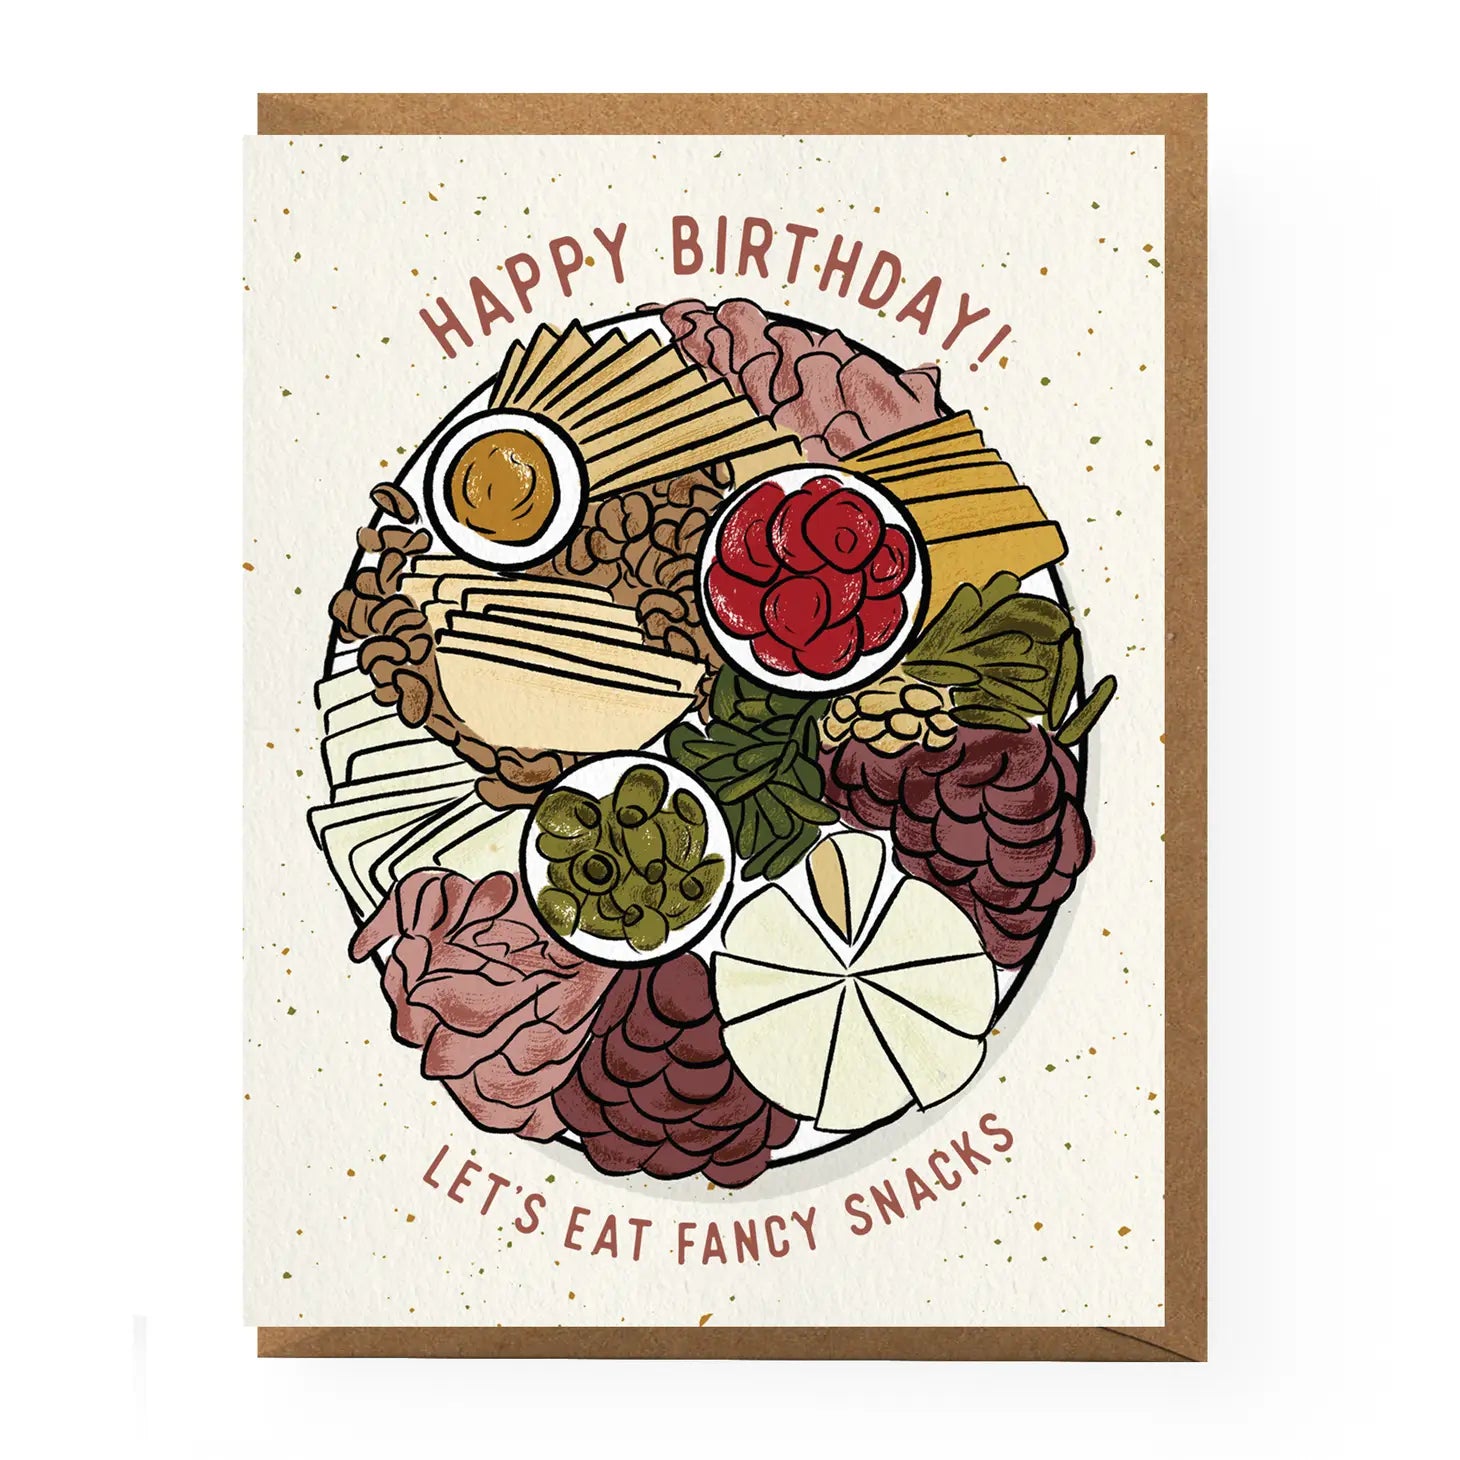 birthday card that reads "Happy Birthday!" at the top, above a round, illustrated picture of charcuterie board items, framed at the bottom with "let's eat fancy snacks" All on a speckled, white background with a brown envelope in between.